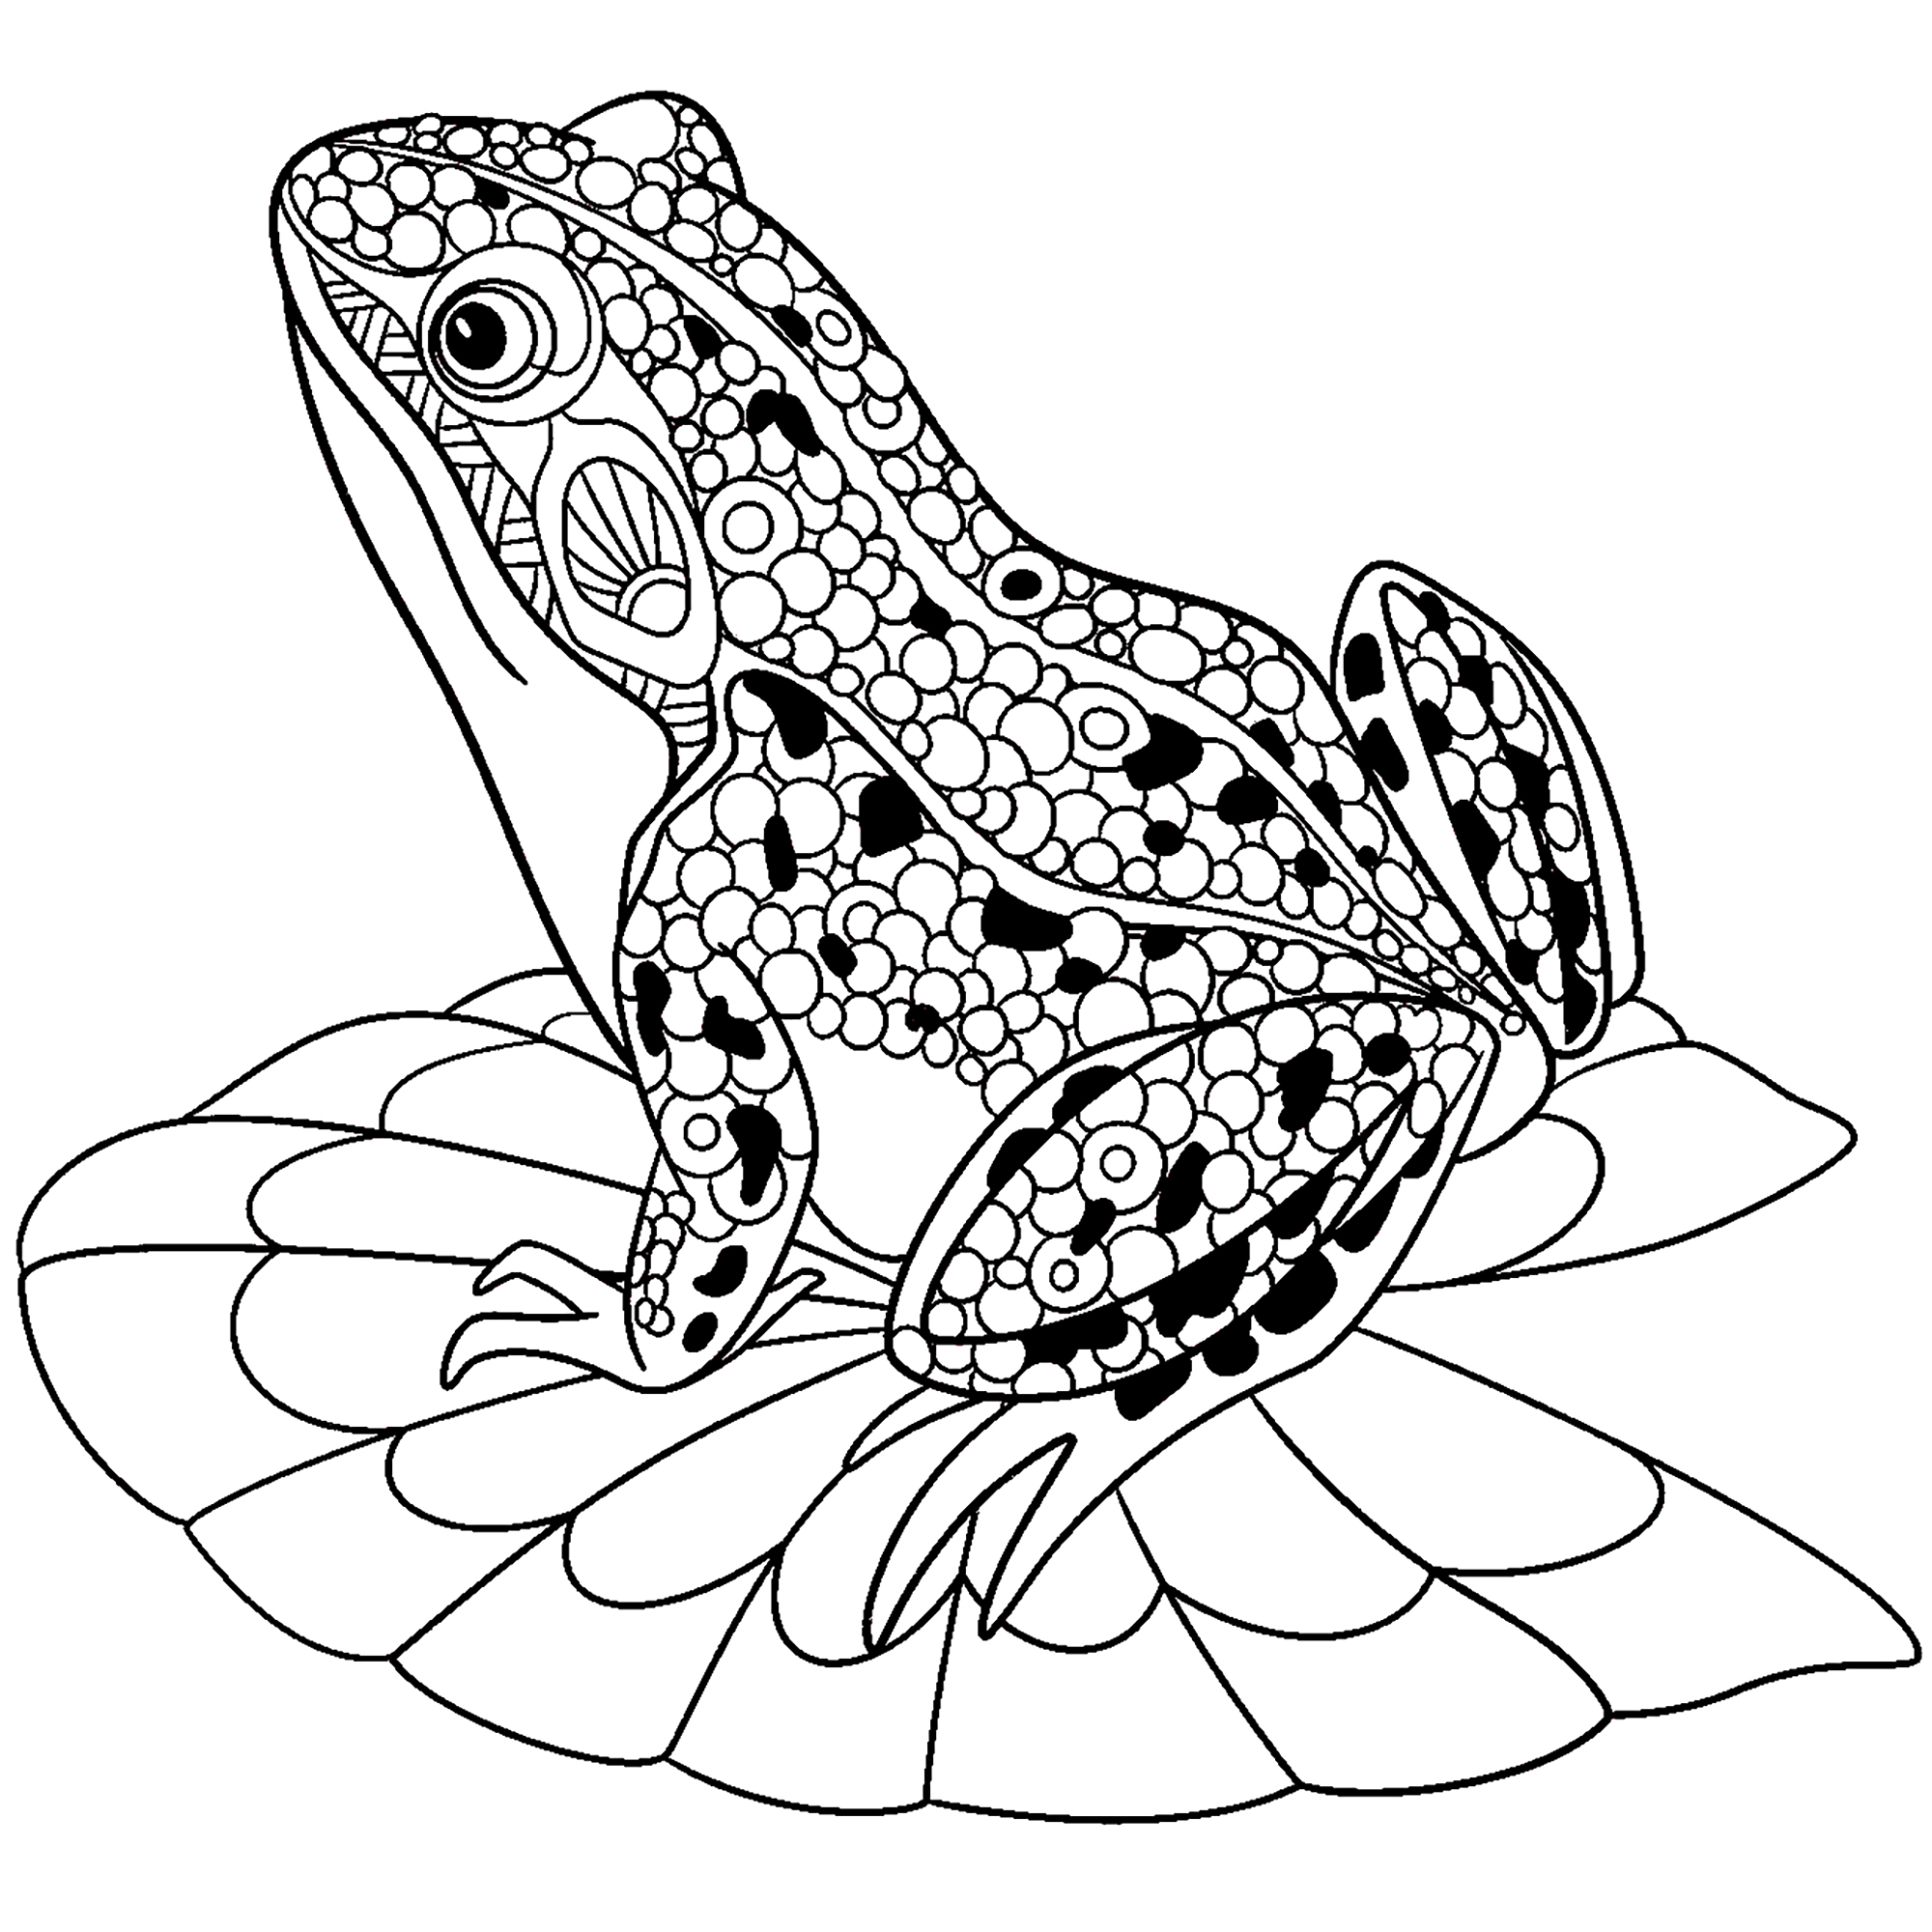 Frog Coloring Pages For Adults Halaman Mewarnai Adult Coloring Pages ...